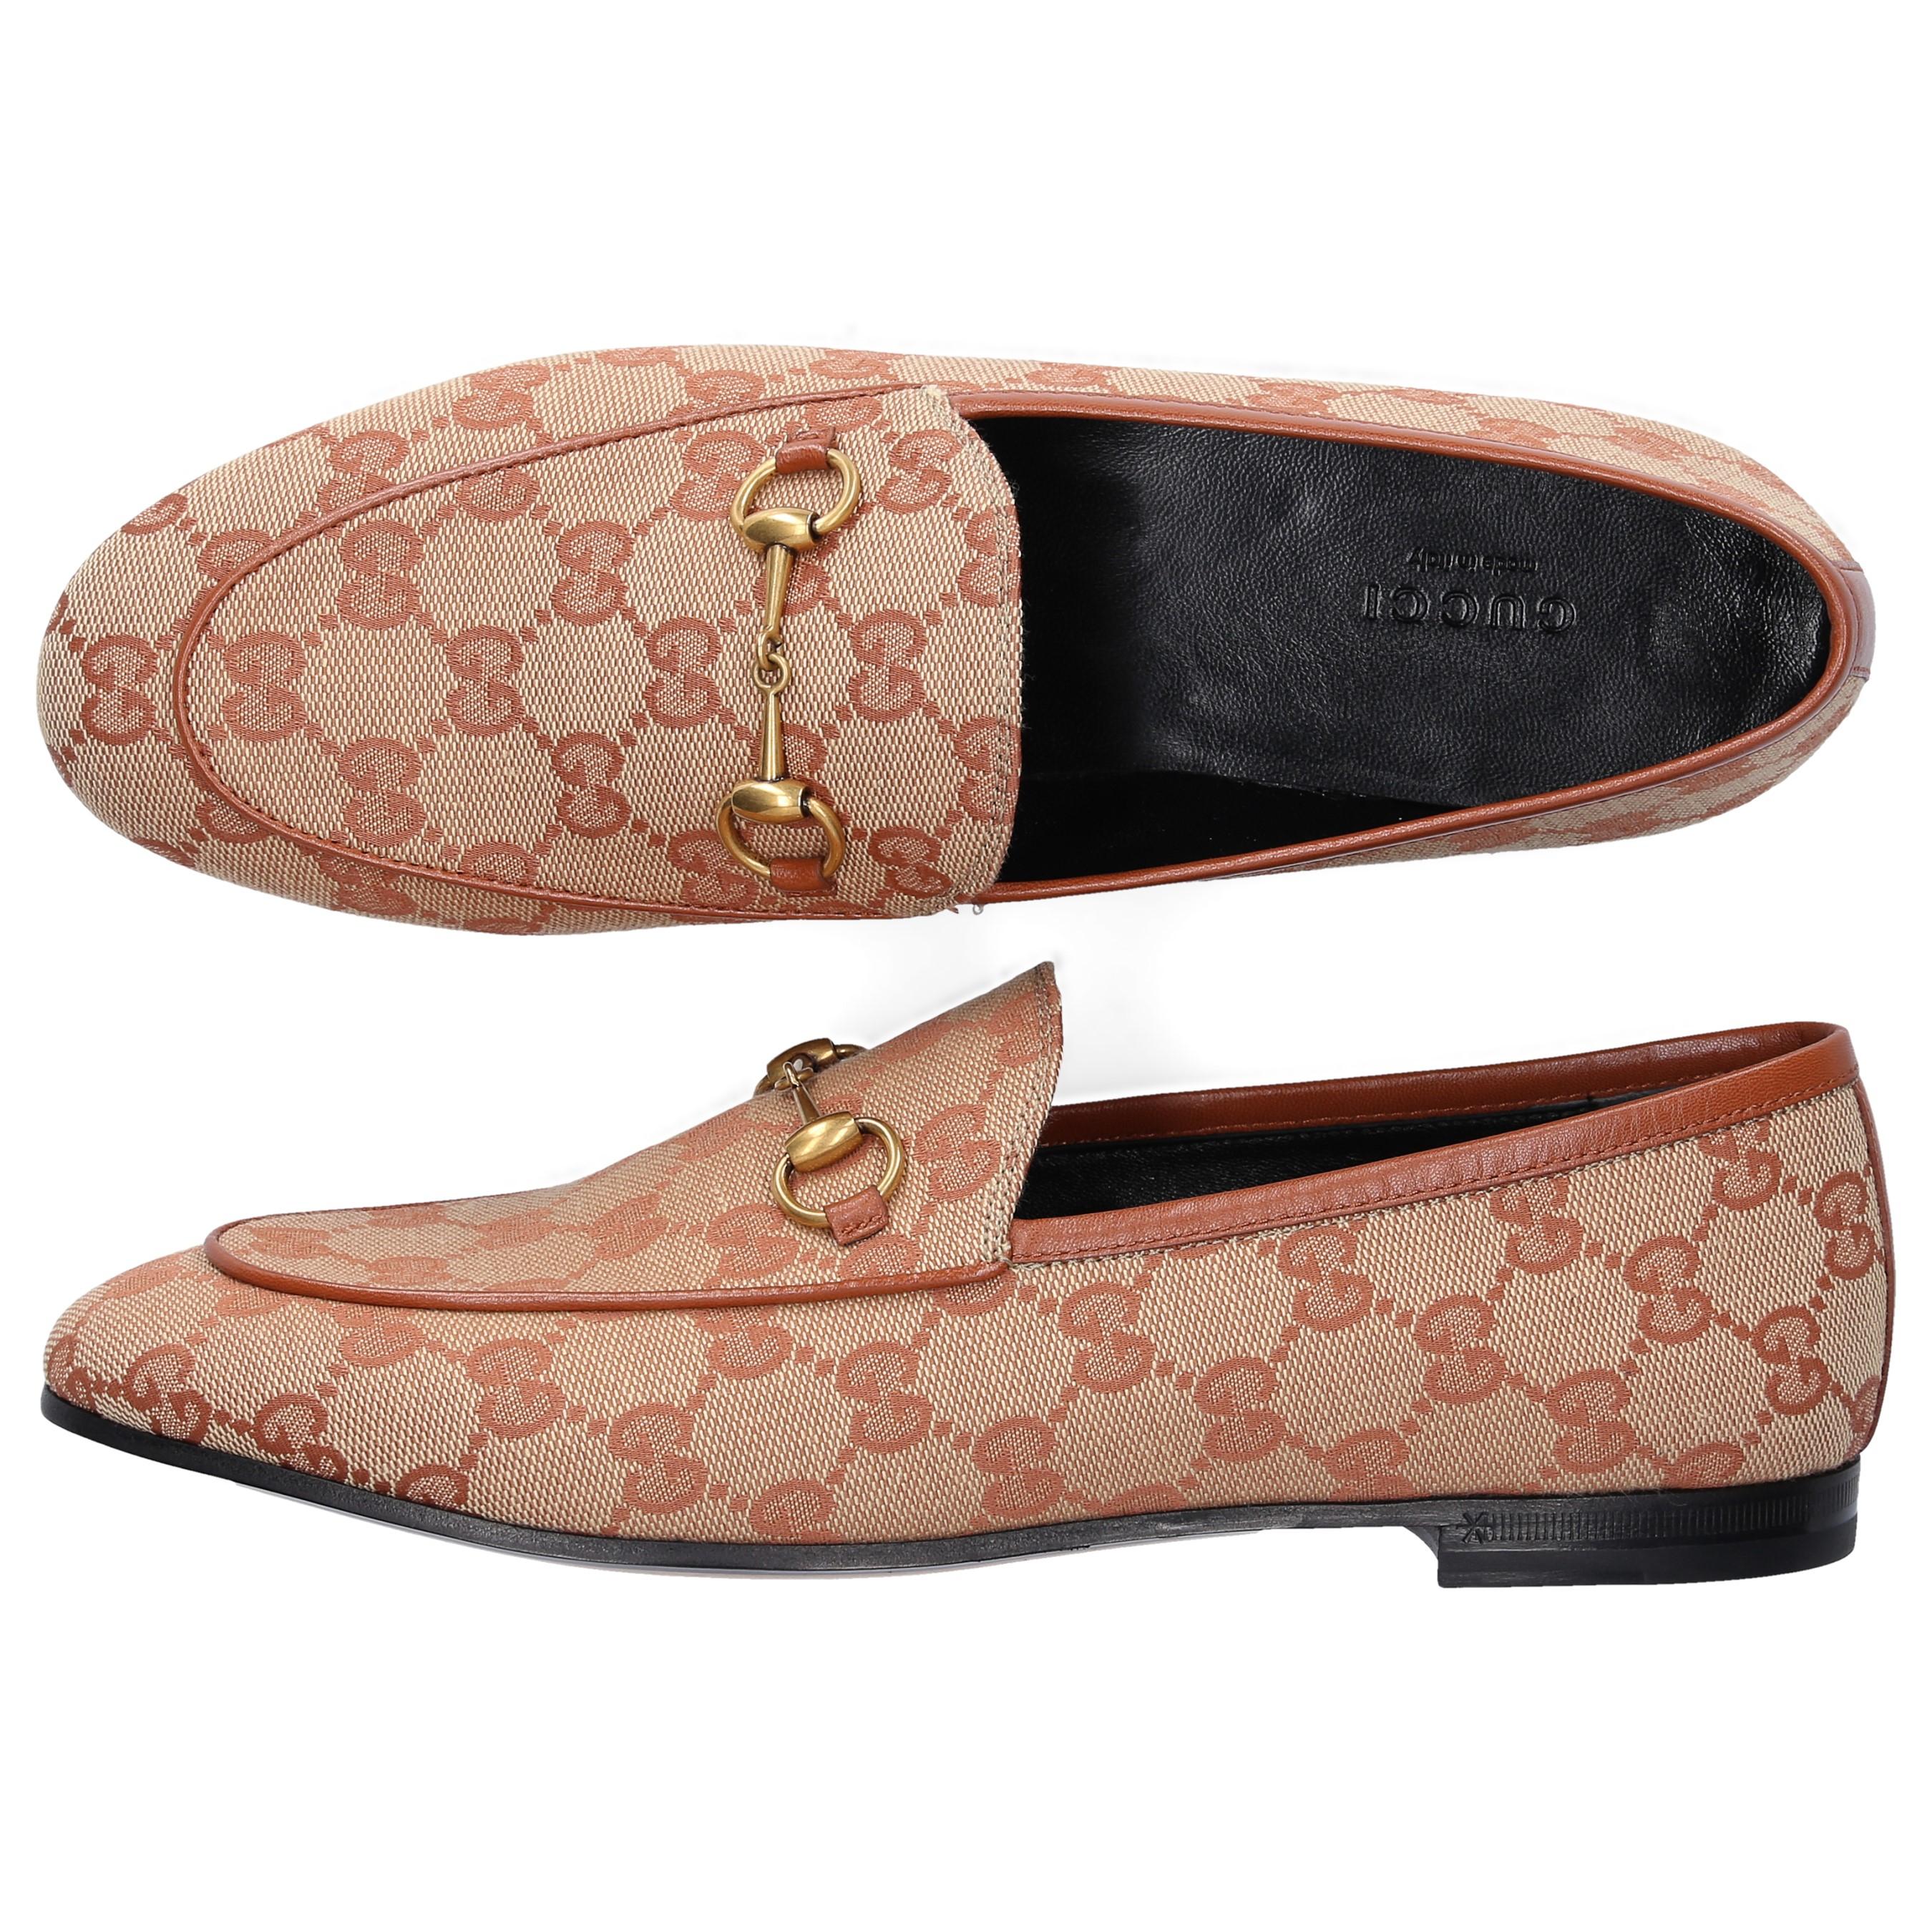 Gucci Canvas Slip On Shoes Jordaan in Beige (Natural) - Lyst